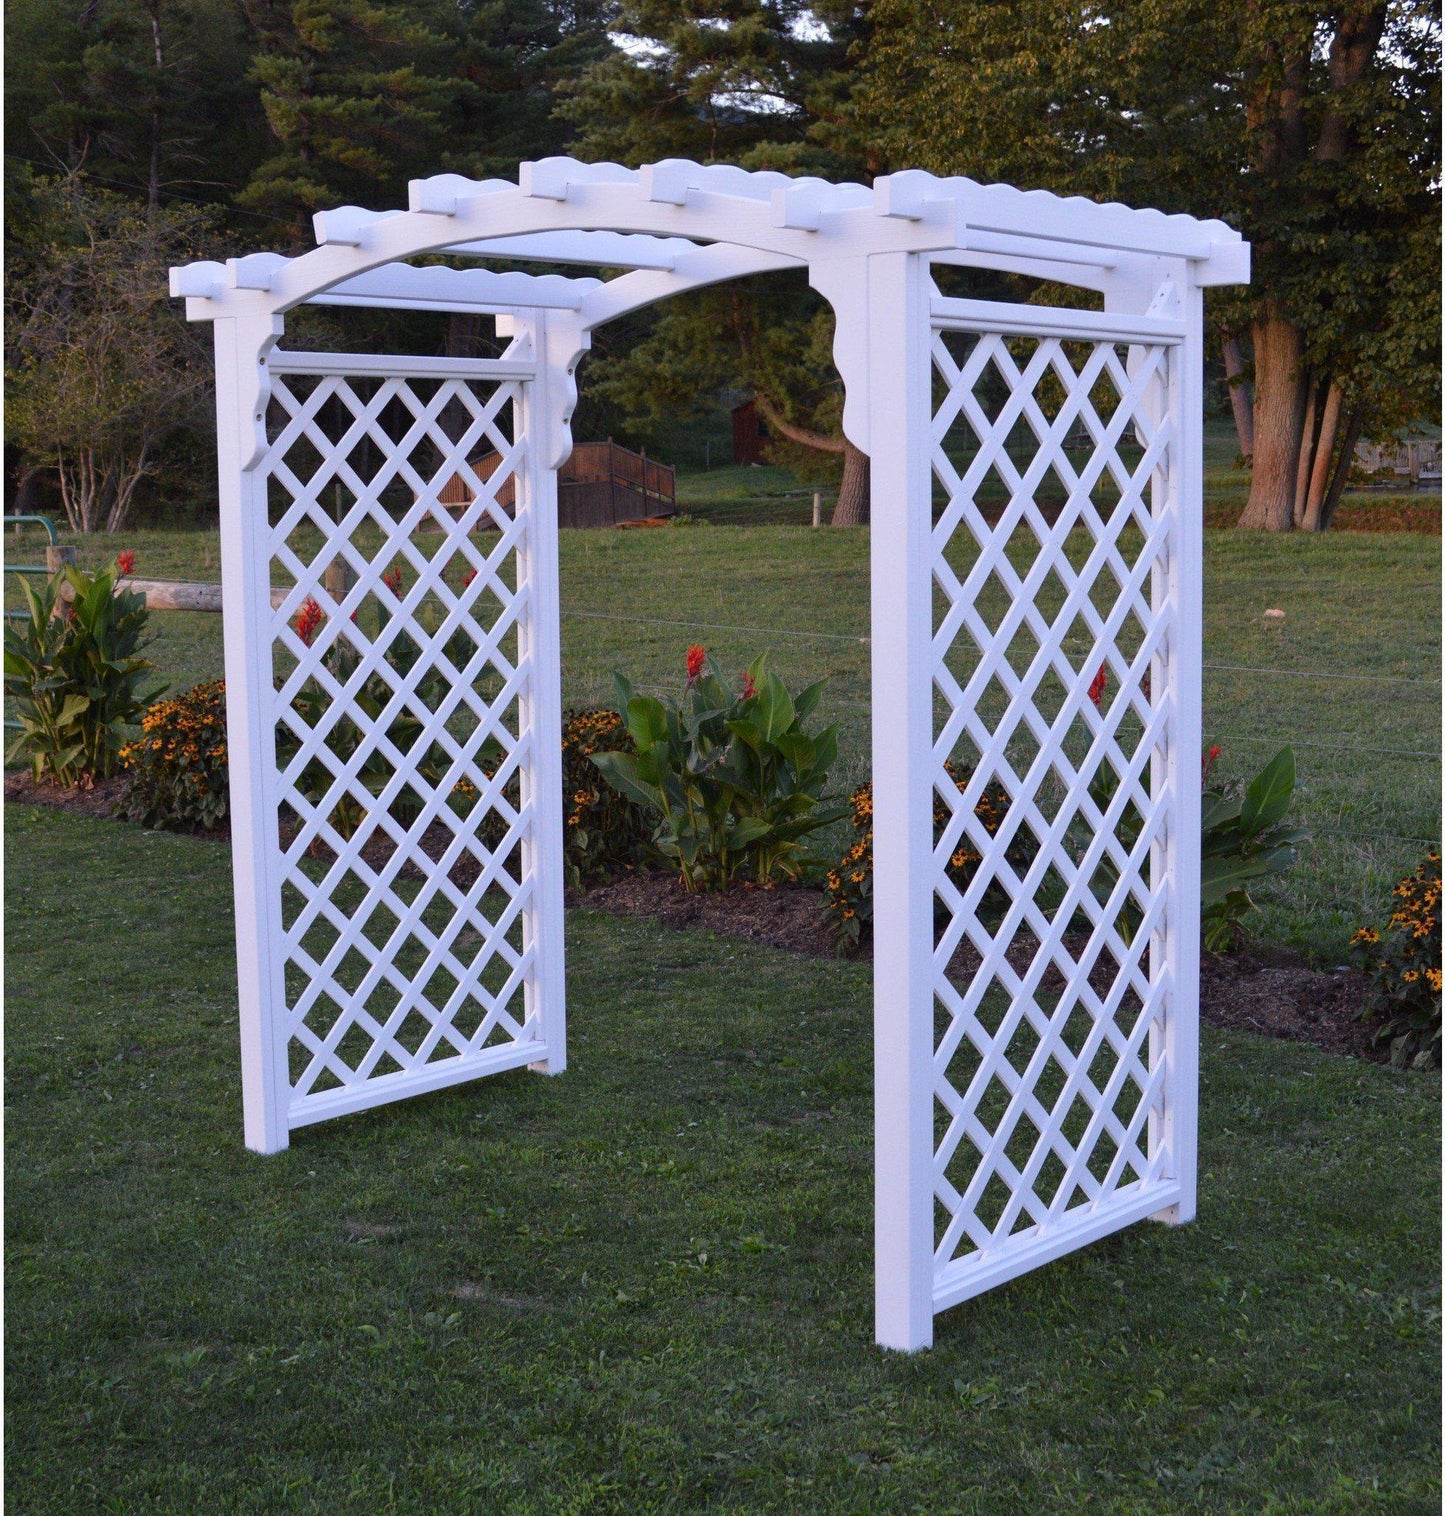 A & L FURNITURE CO. 6' Jamesport Pressure Treated Pine Arbor  - Ships FREE in 5-7 Business days - Rocking Furniture